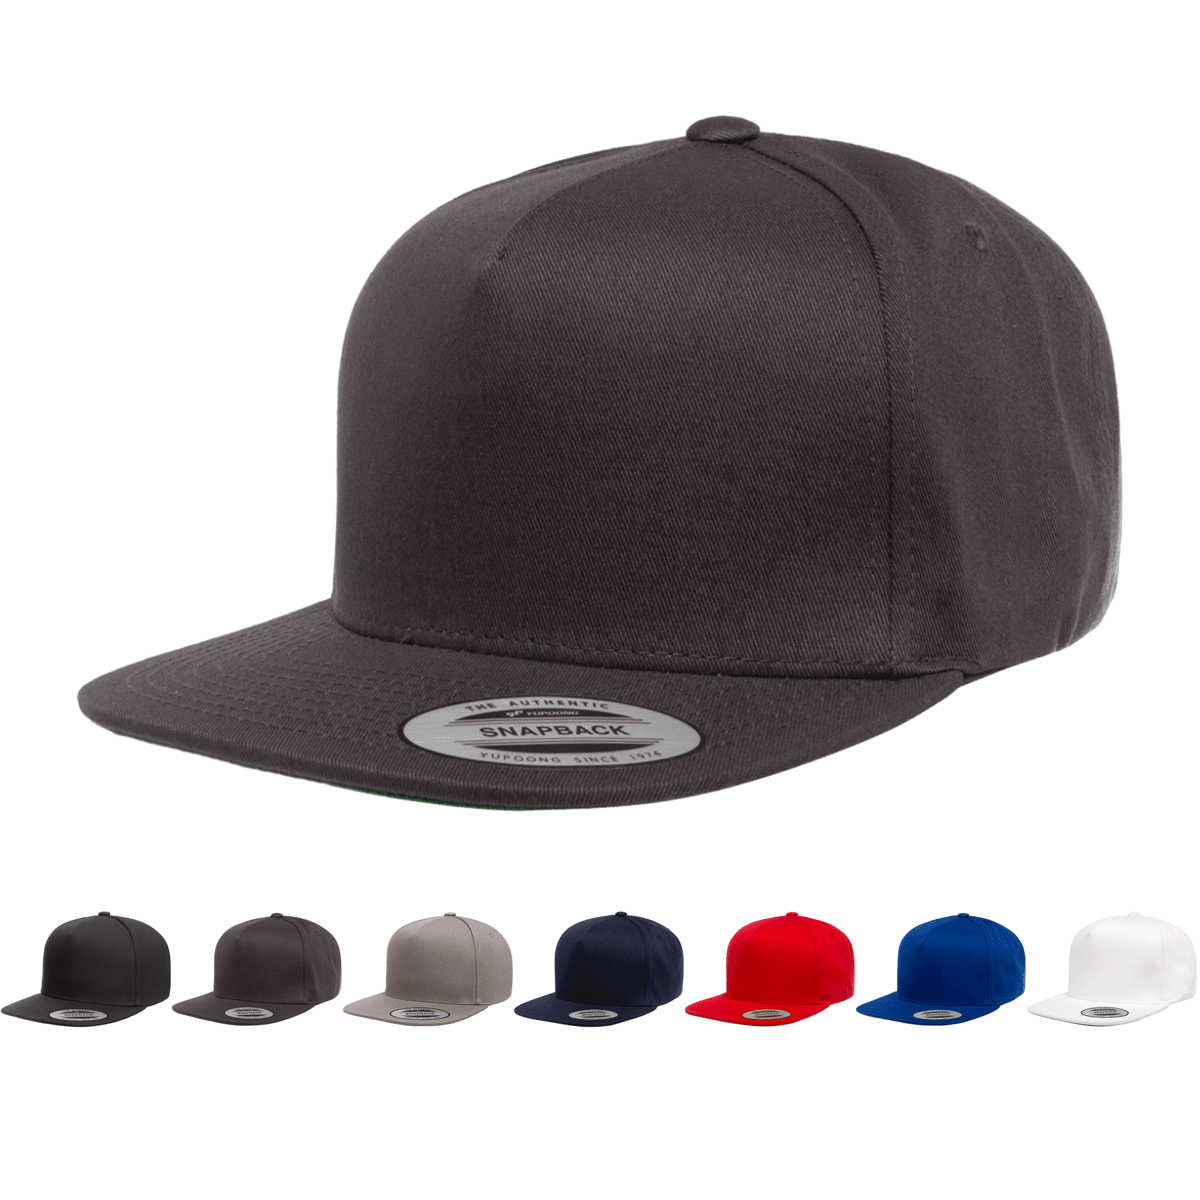 Cotton The - YP – Snapback 6007 Cla Yupoong Twill Hat, Bill Cap Wholesale Flat 5-Panel Park